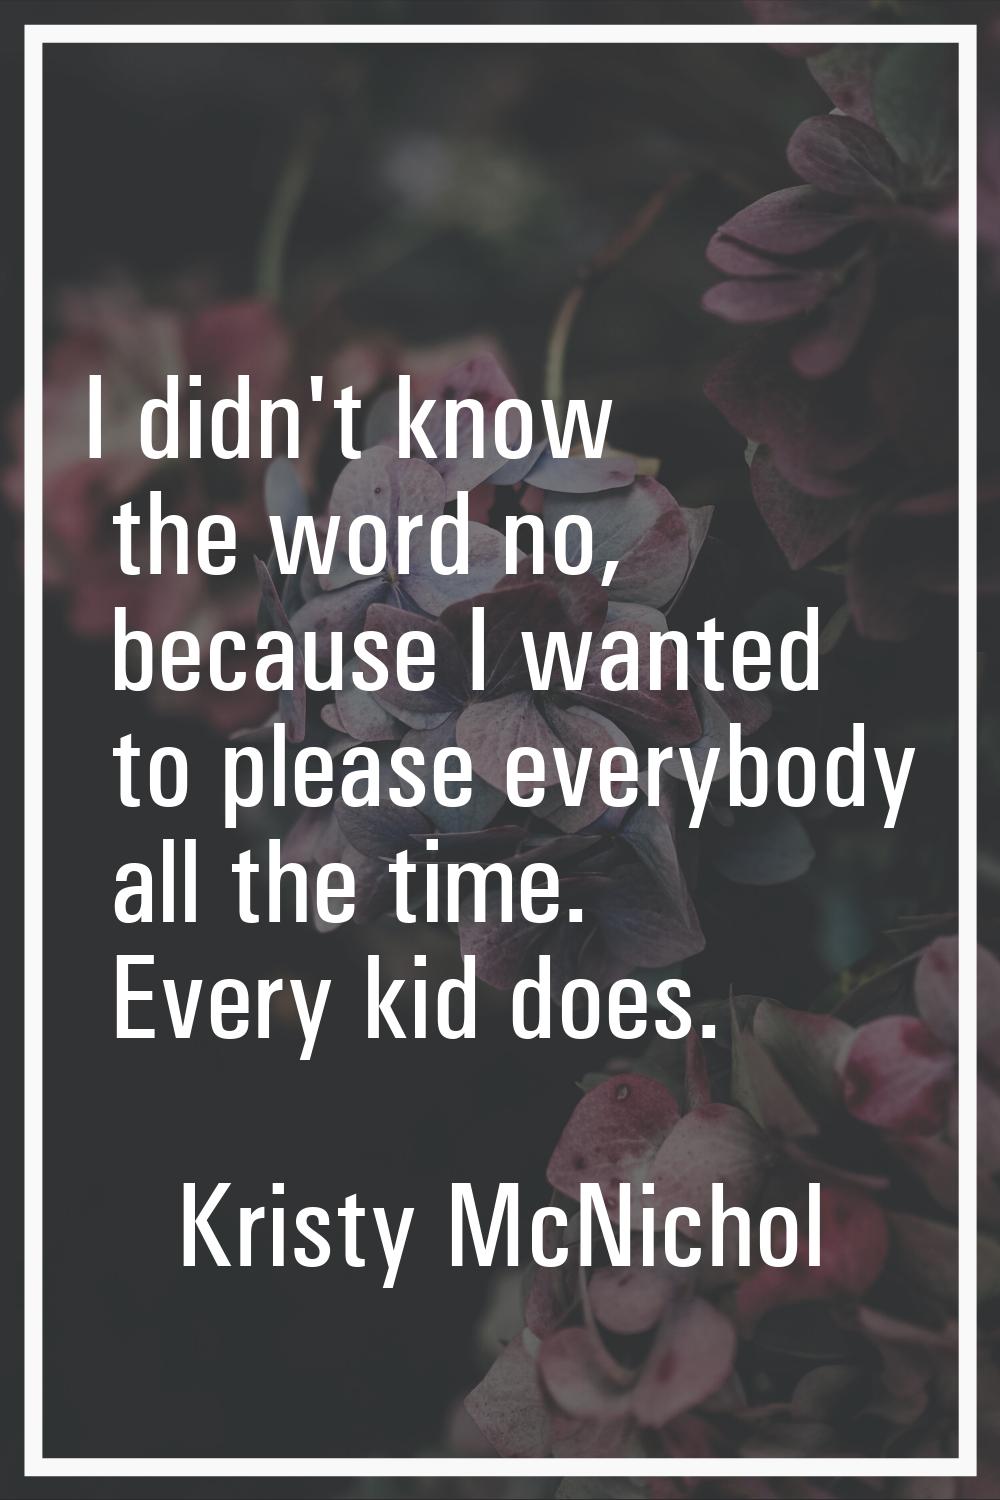 I didn't know the word no, because I wanted to please everybody all the time. Every kid does.